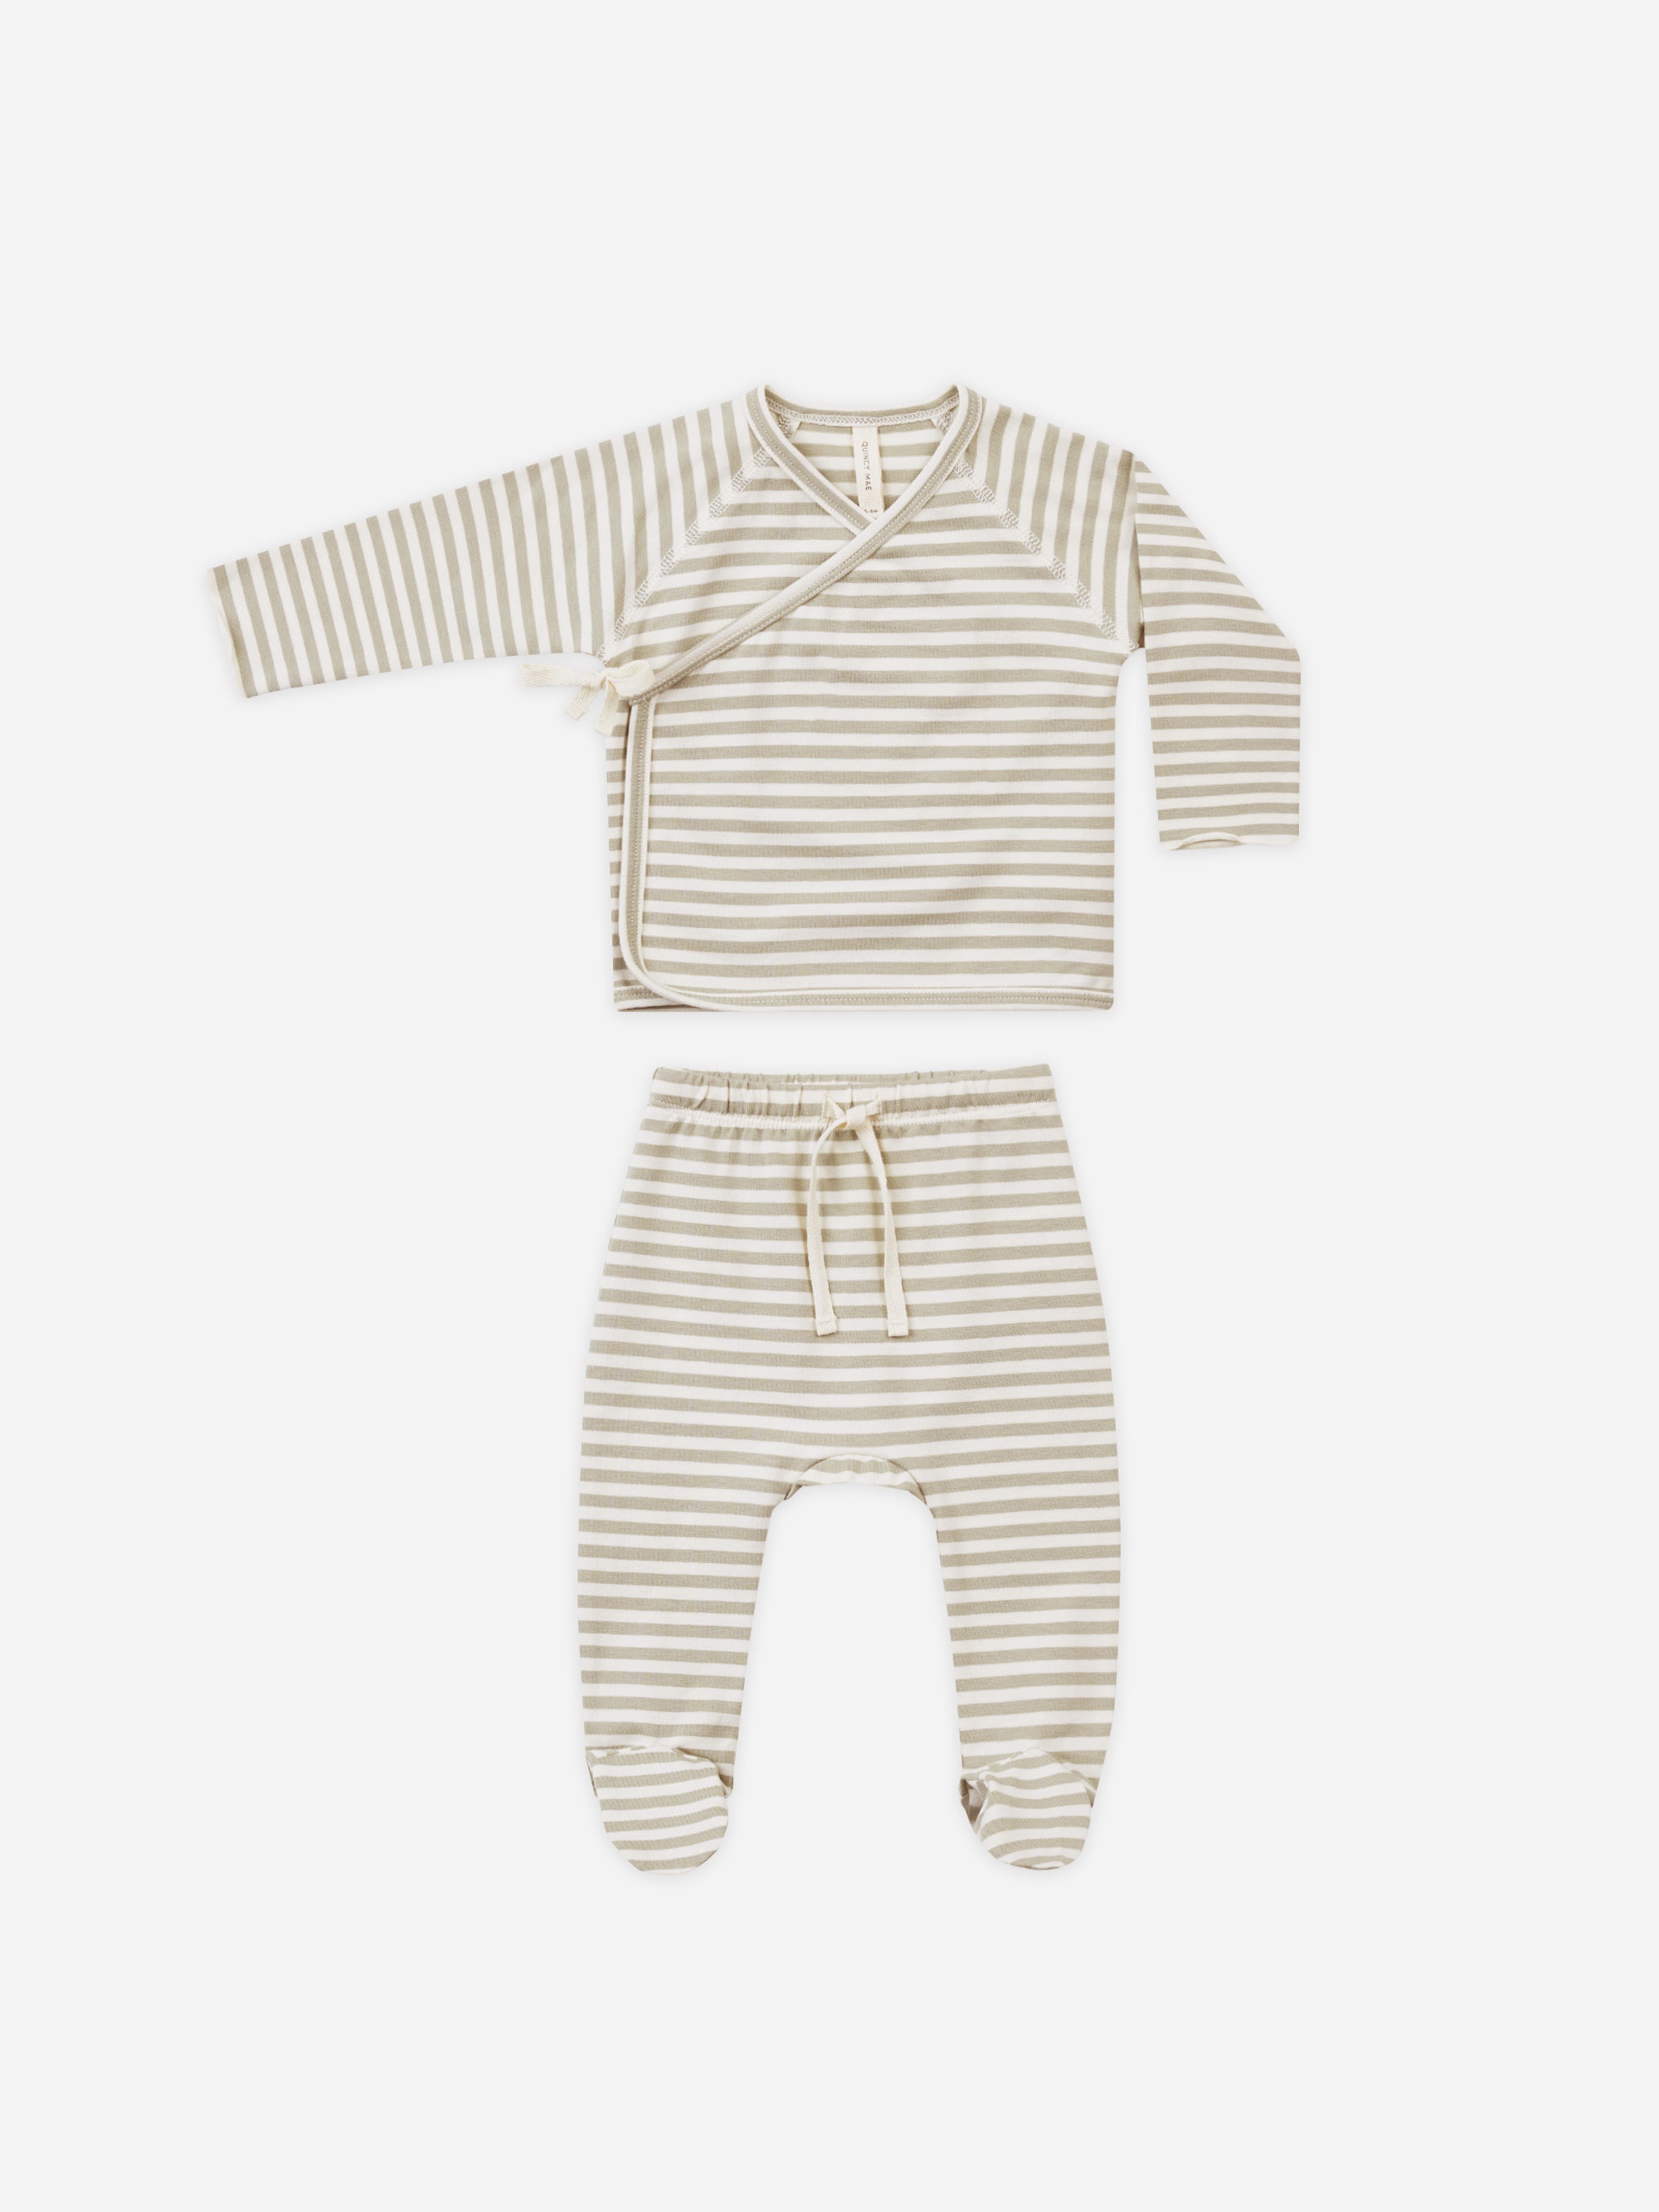 Wrap Top + Footed Pant Set || Ash Stripe - Rylee + Cru | Kids Clothes | Trendy Baby Clothes | Modern Infant Outfits |